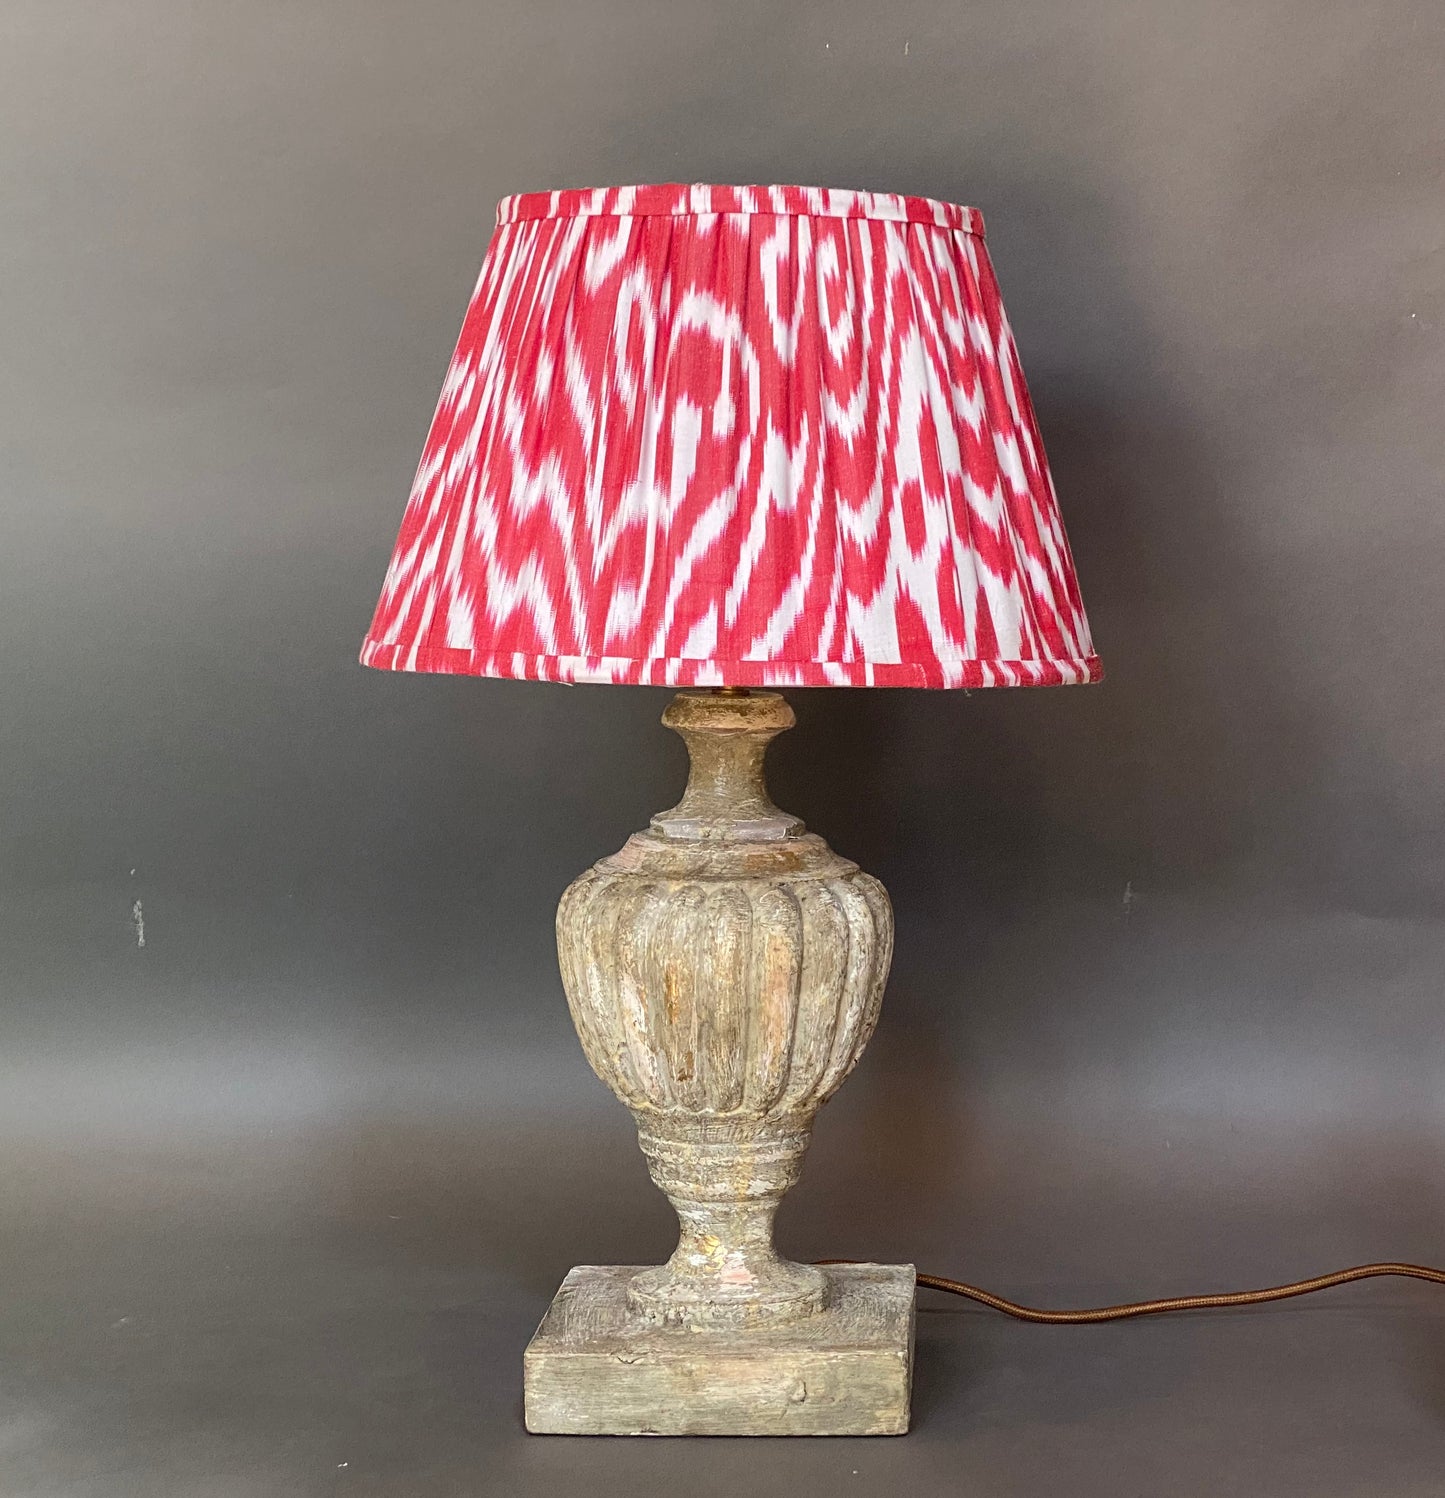 Red and white ikat silk lampshade shown on an urn lamp base with a grey background